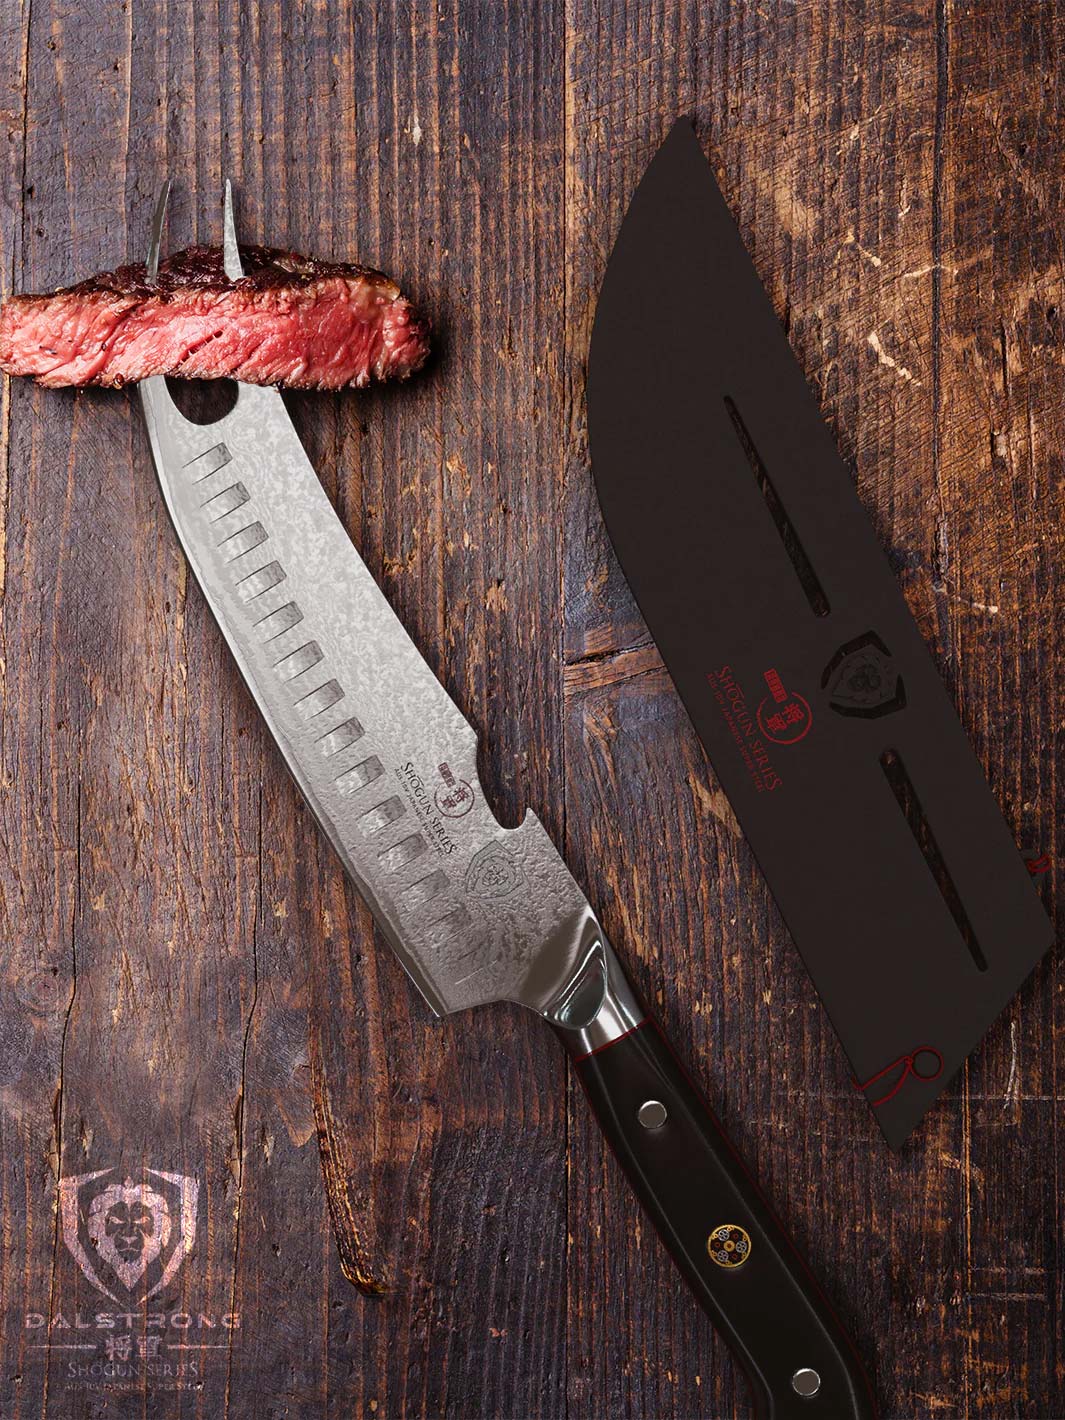 Dalstrong shogun series 8 inch pitmaster knife with black handle and sheath on a wooden table.